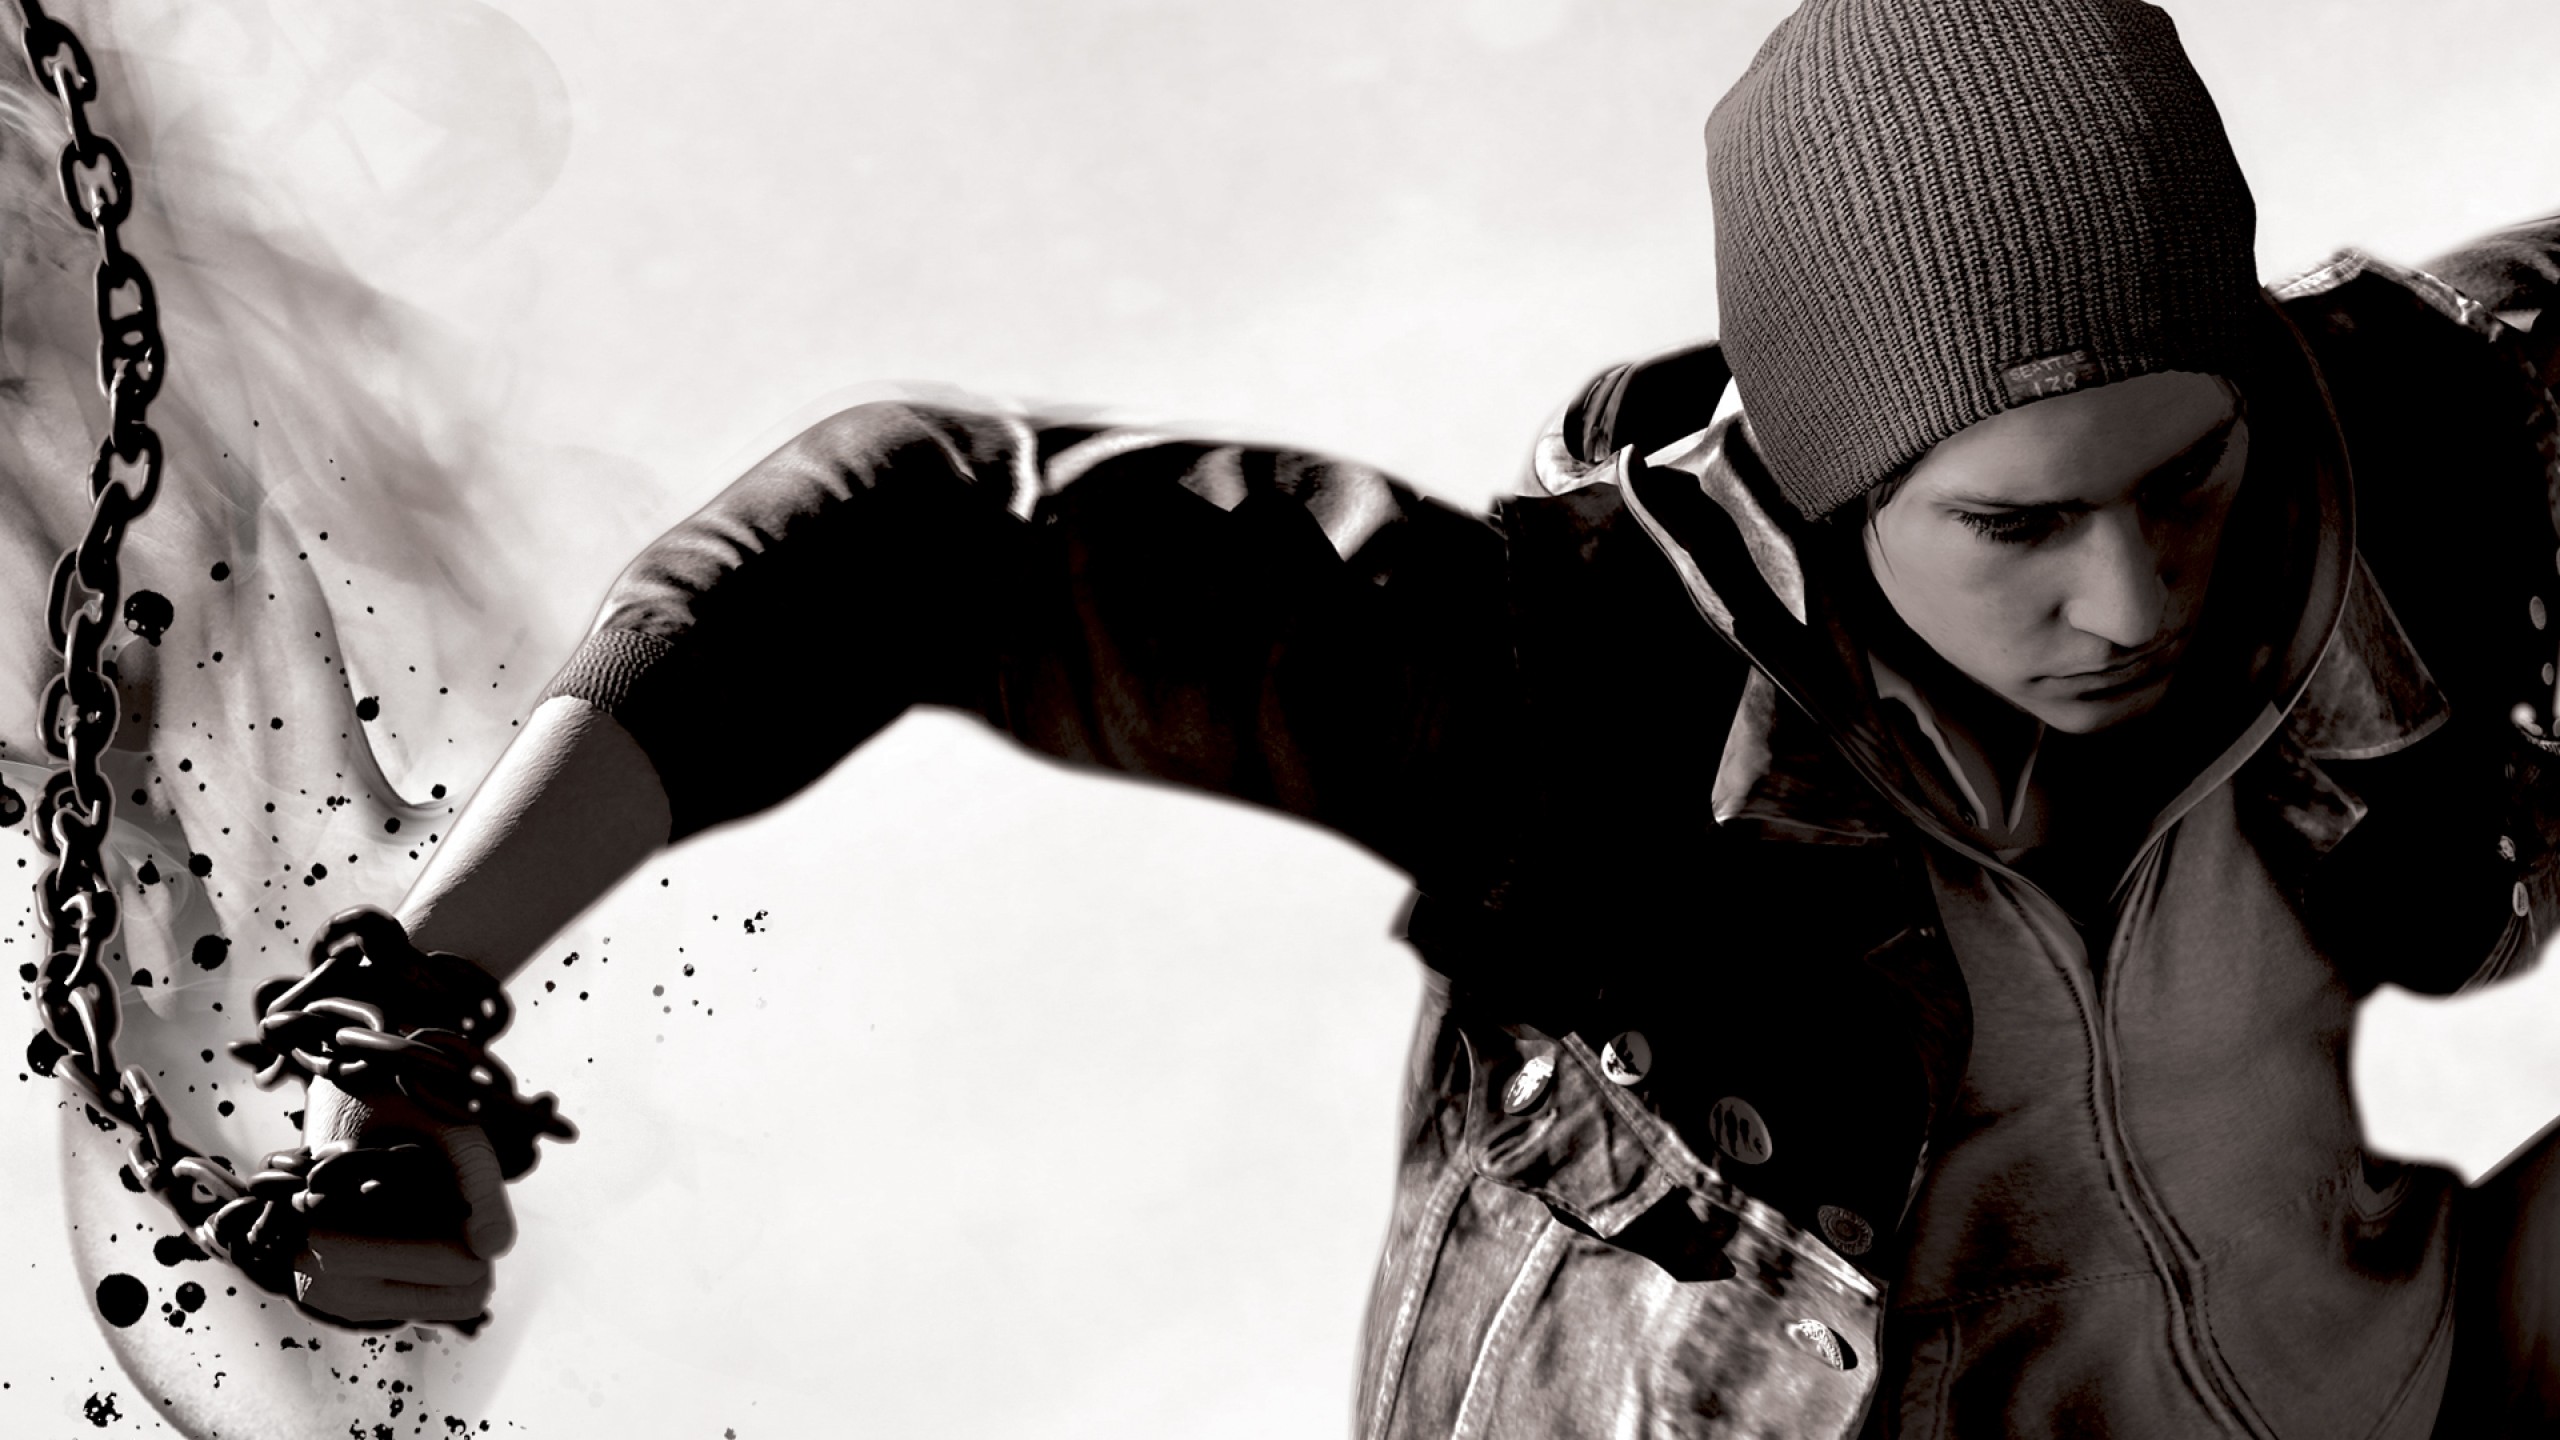 infamous second son wallpaper,black and white,beauty,cool,fashion,monochrome